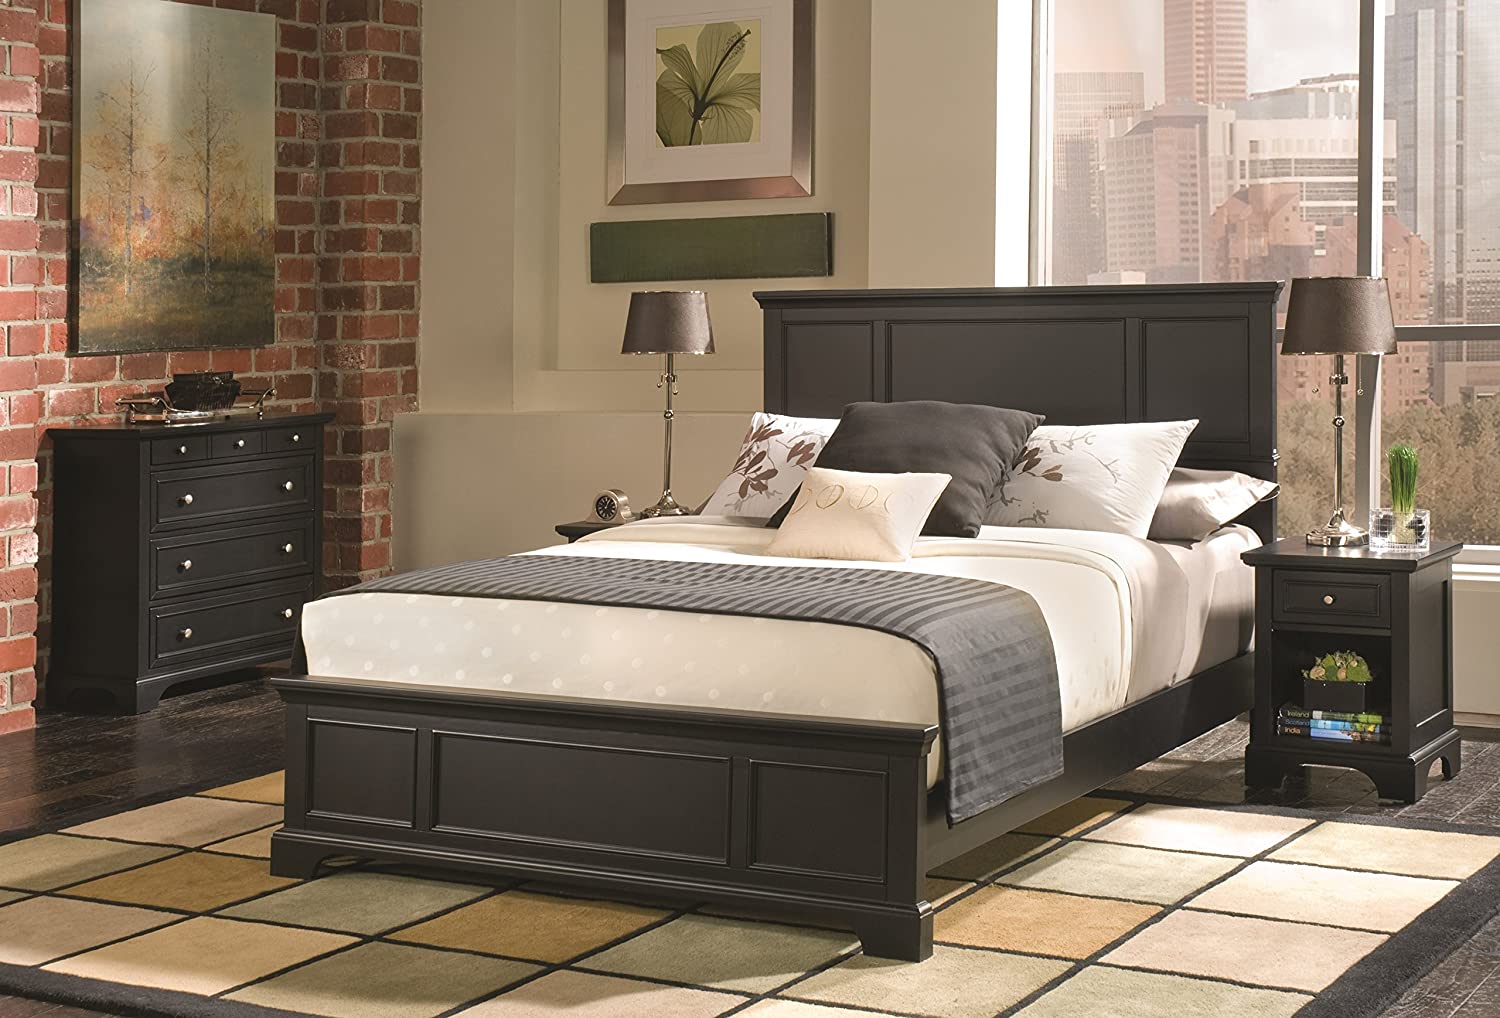 cheapest place to buy bedroom furniture